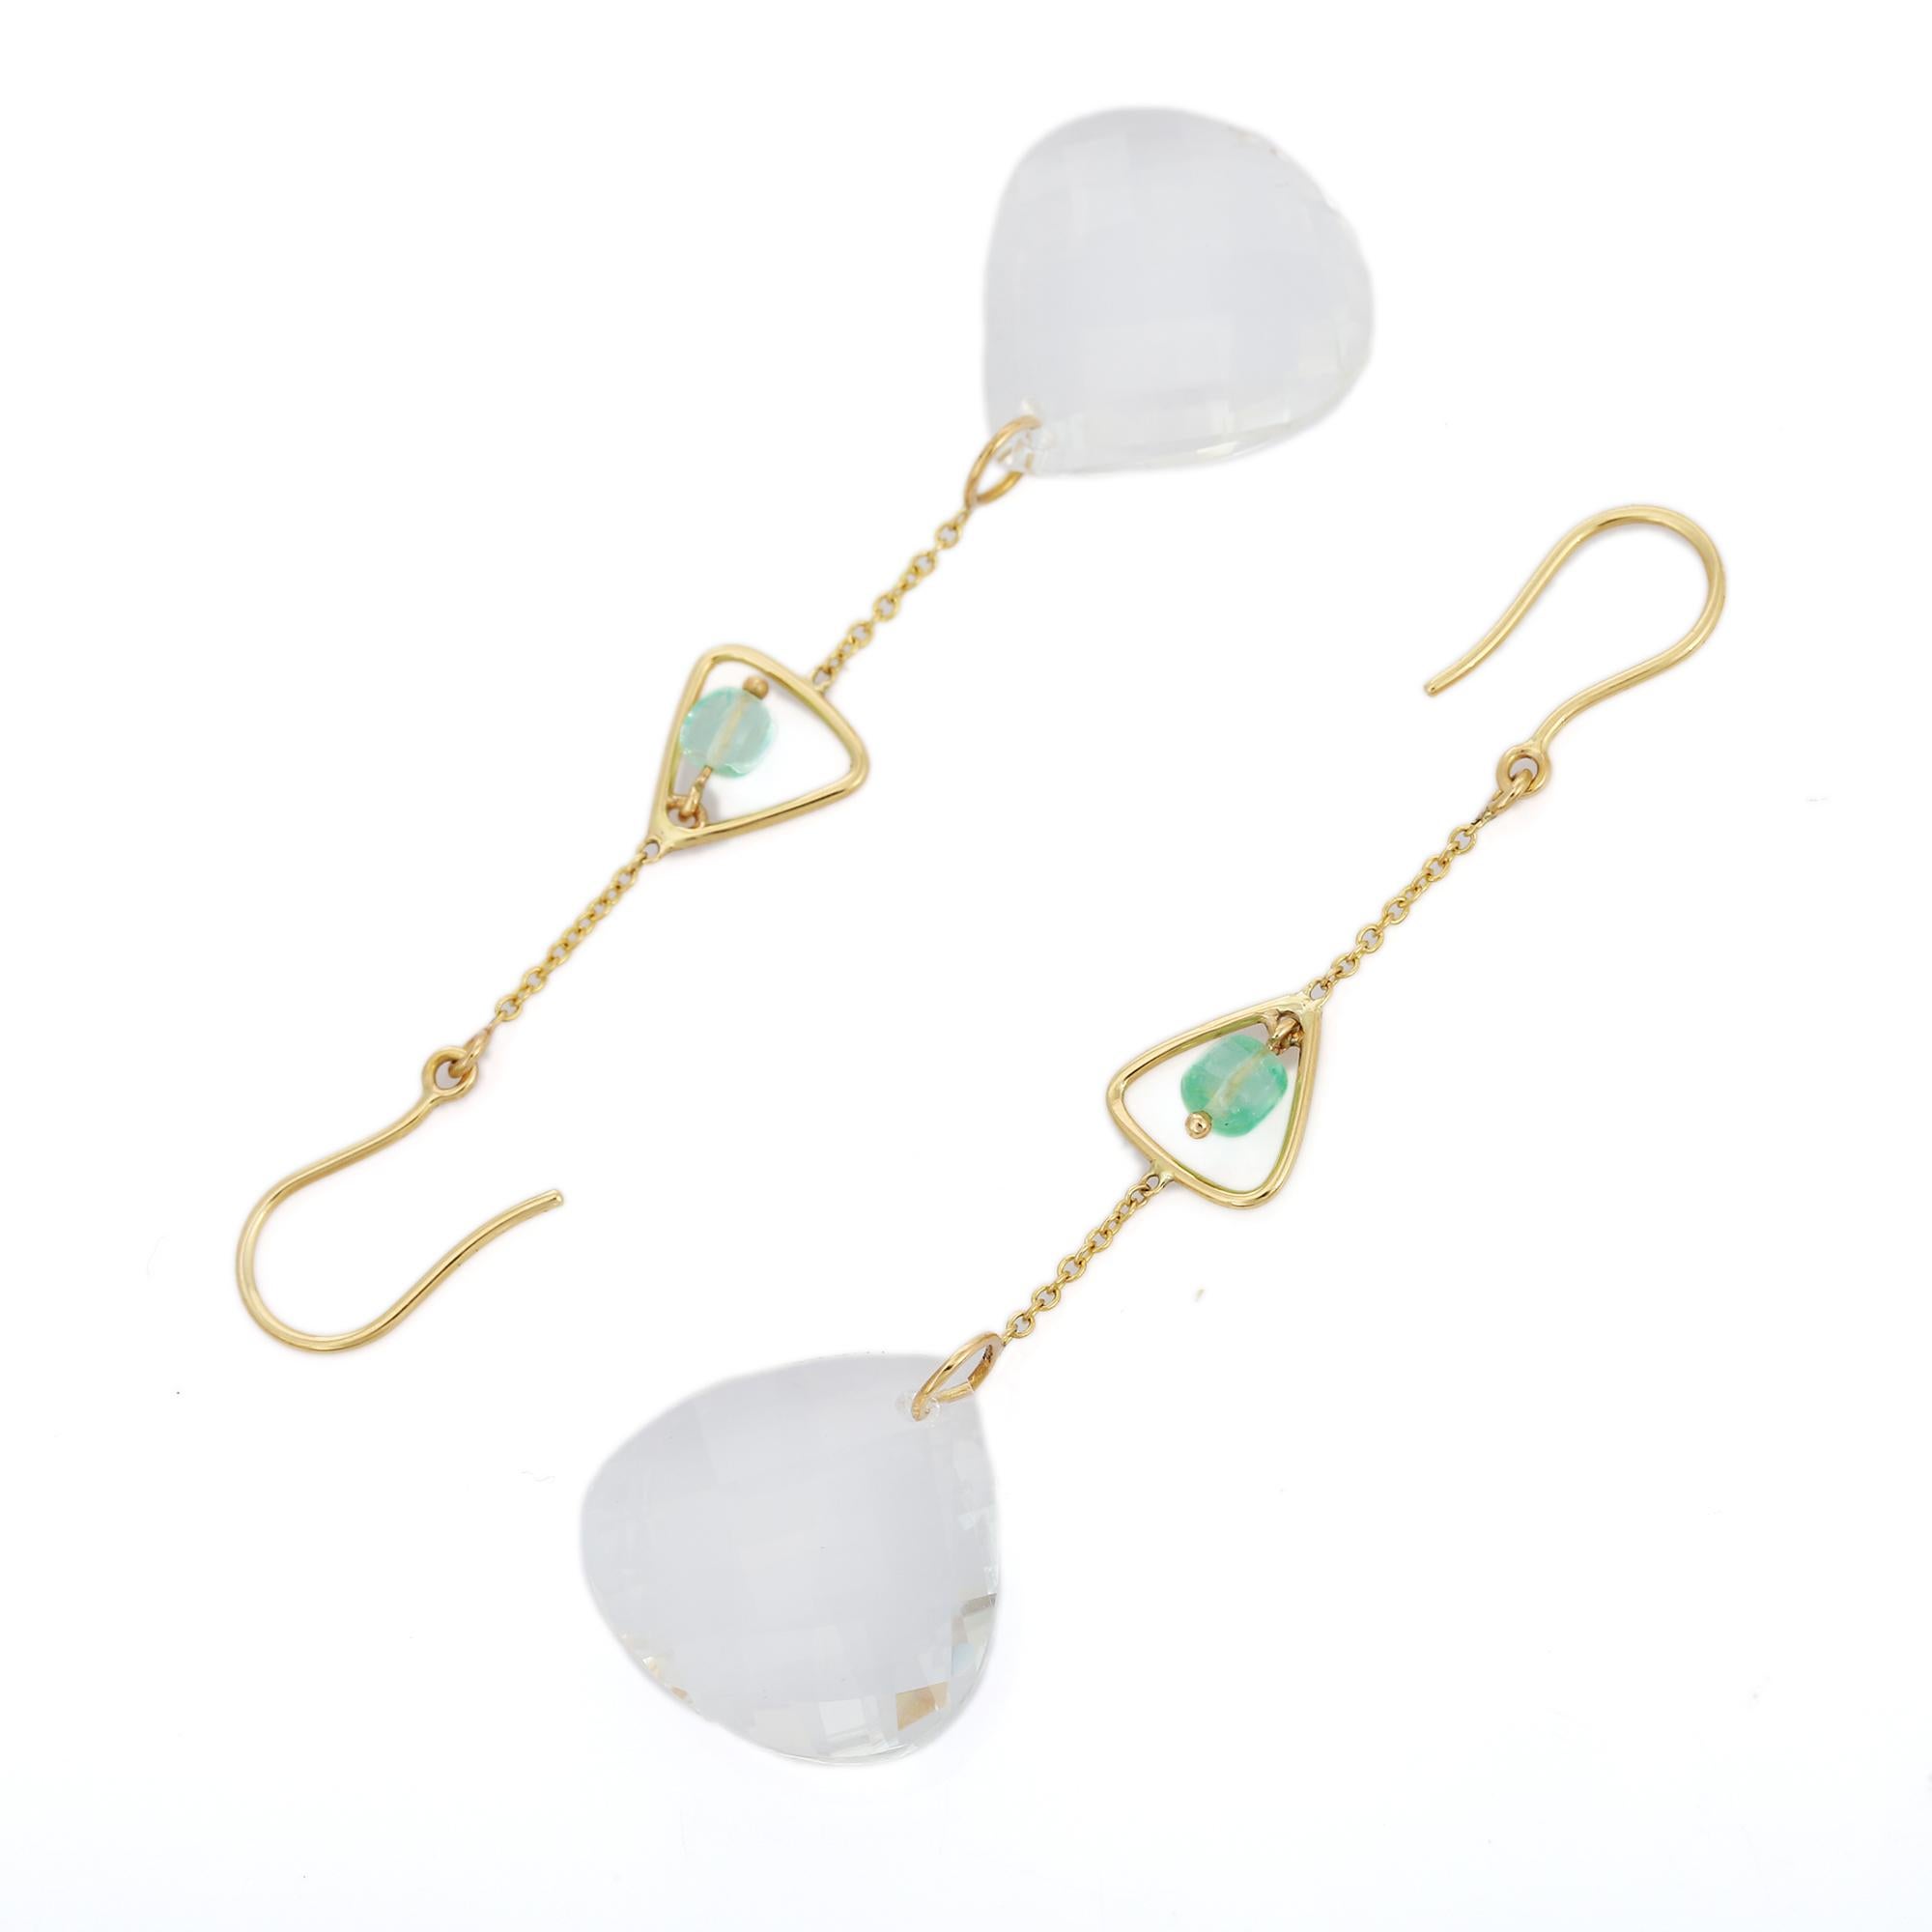 Emerald and Crystal Dangle earrings to make a statement with your look. These earrings create a sparkling, luxurious look featuring tumbler cut gemstone.
If you love to gravitate towards unique styles, this piece of jewelry is perfect for